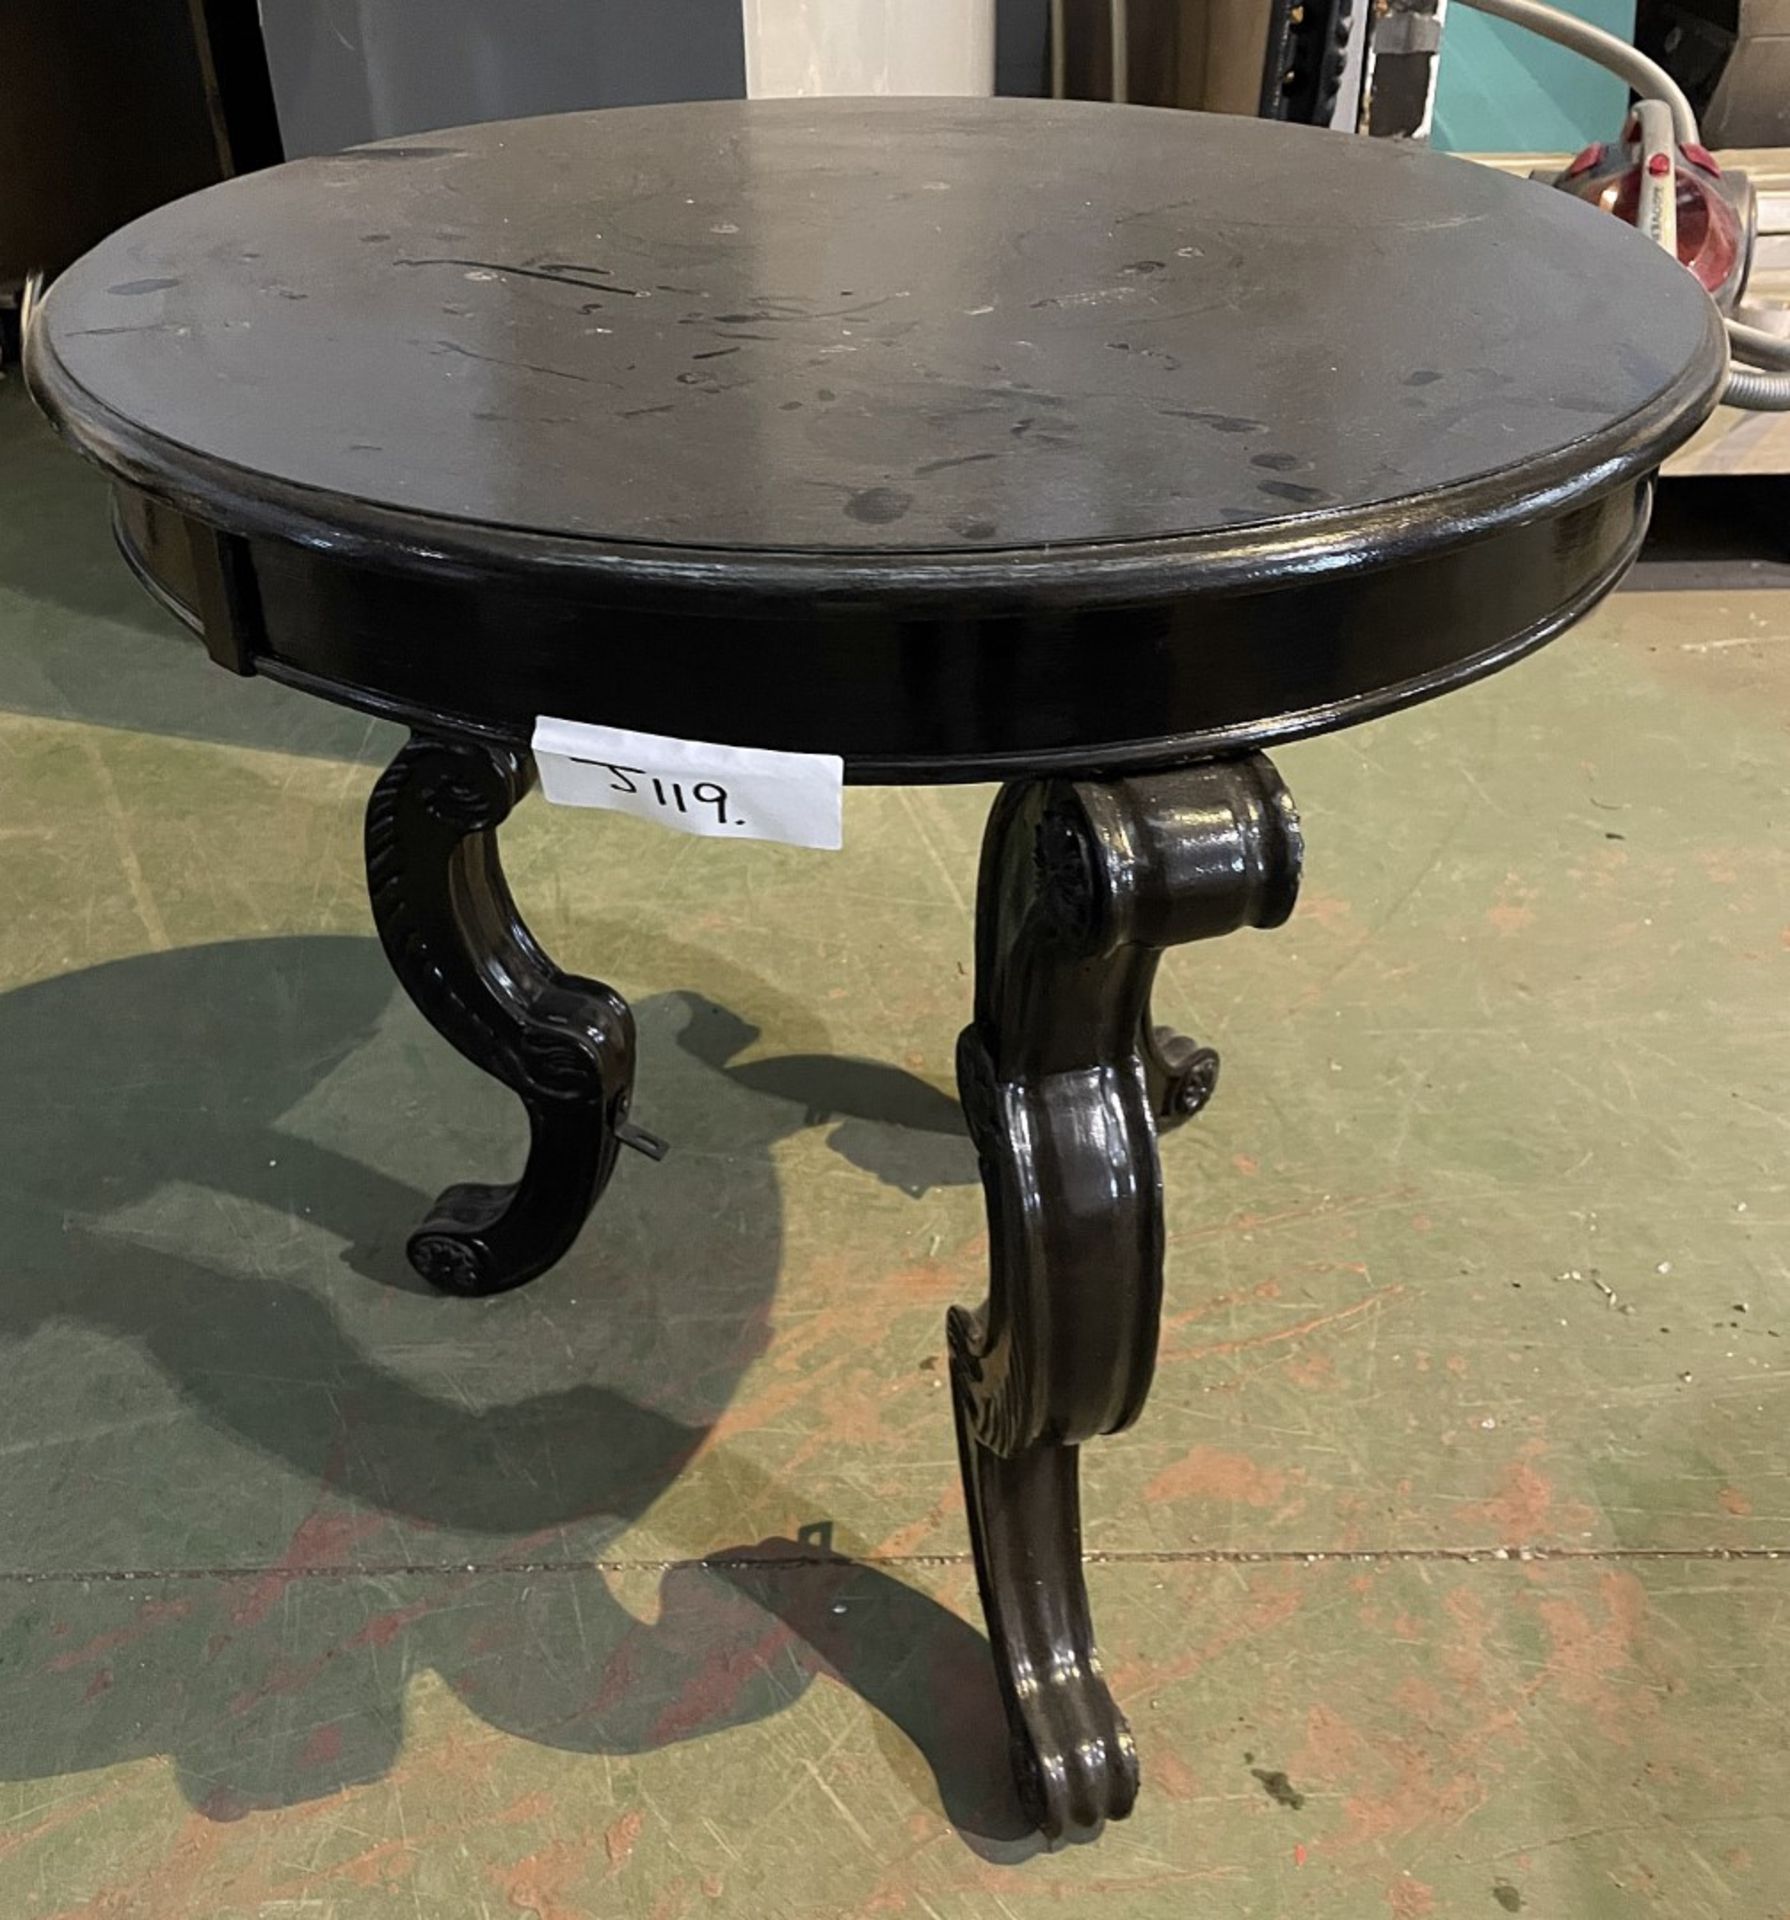 1 x Round Black Painted Wooden Table - Approx 70(D) X 70(H) Cm - Ref: J119 - CL531 - Location: - Image 3 of 5